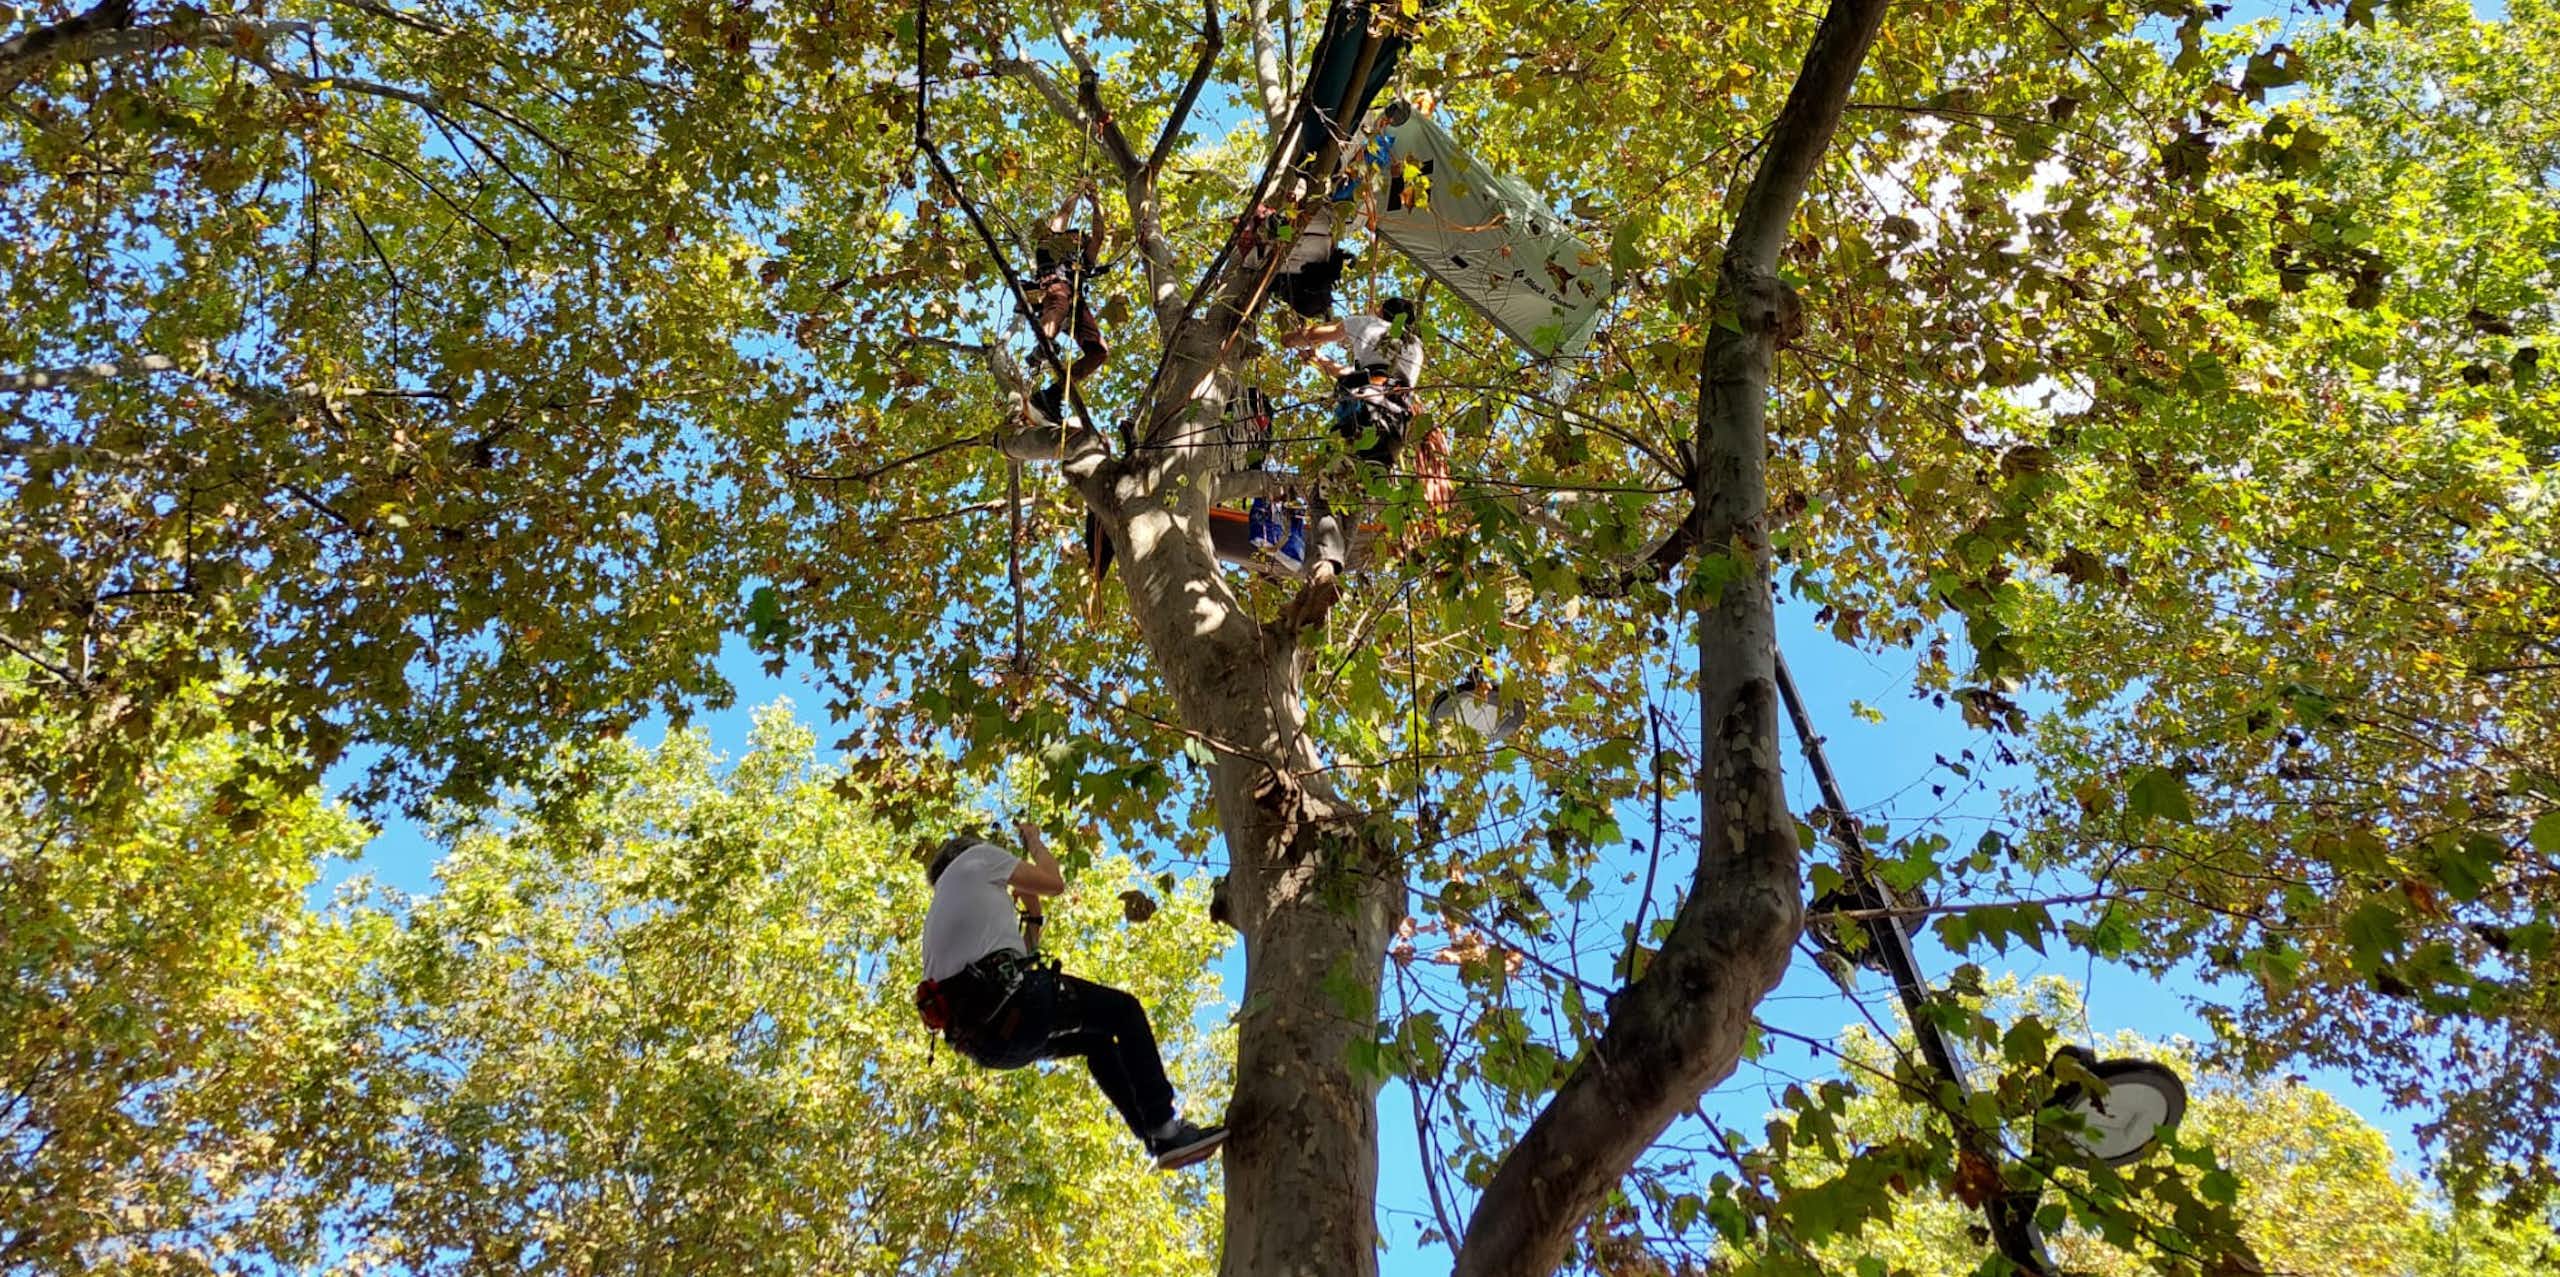 shot looking up at green leafy trees, blue sky in background, one single male protestor climbing up ropes to platform within branches